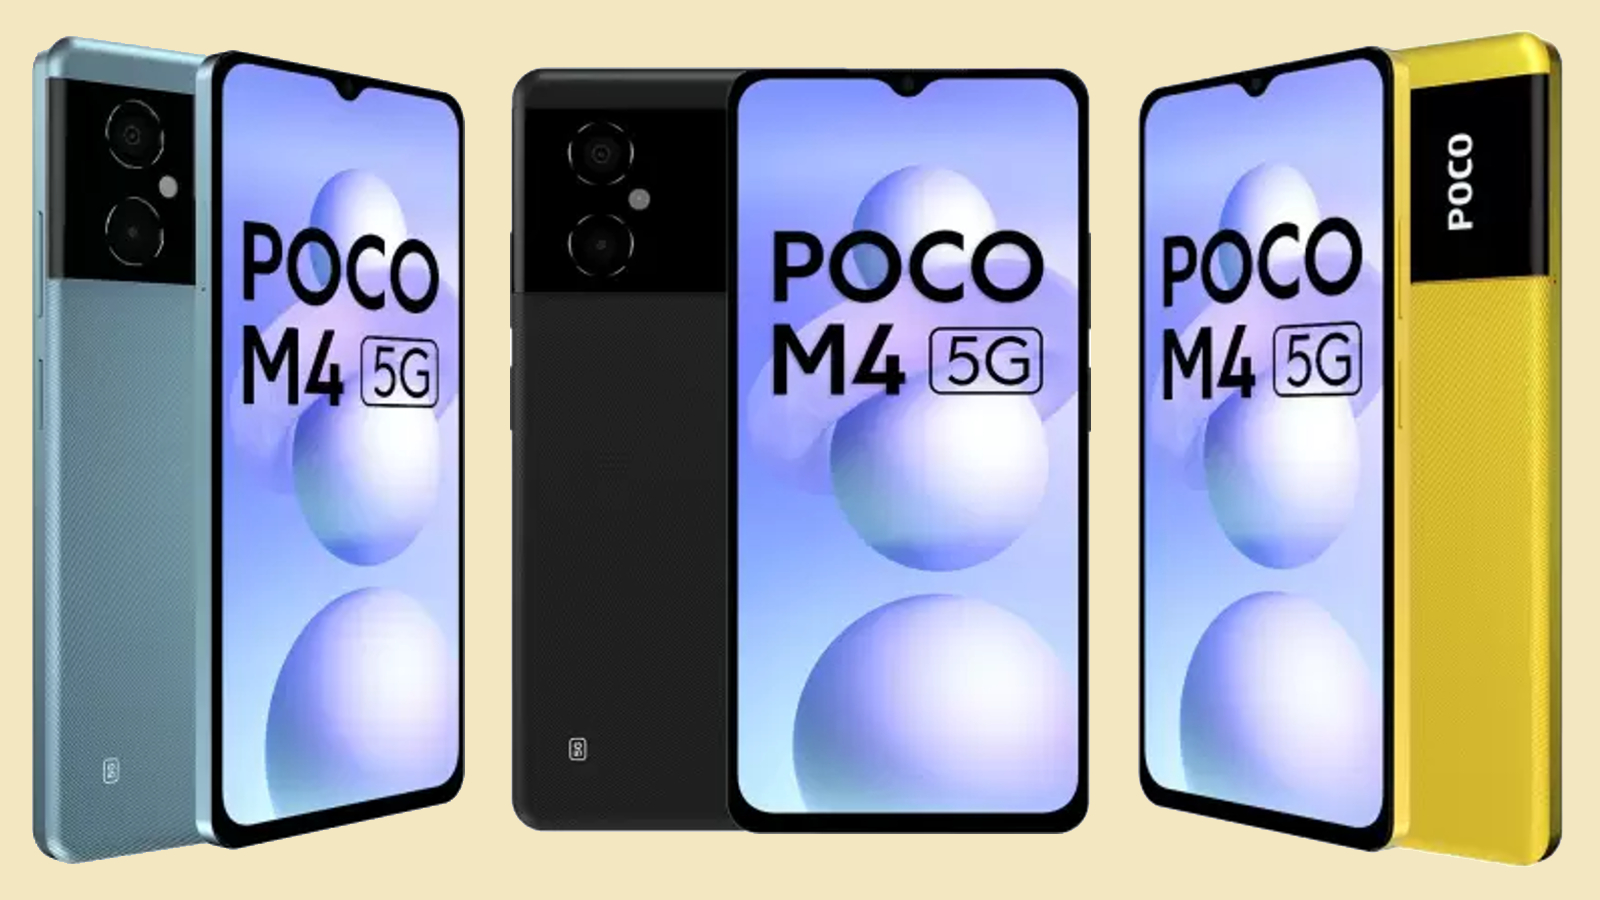 Poco M4 5G launched in India - Its most affordable 5G smartphone so far